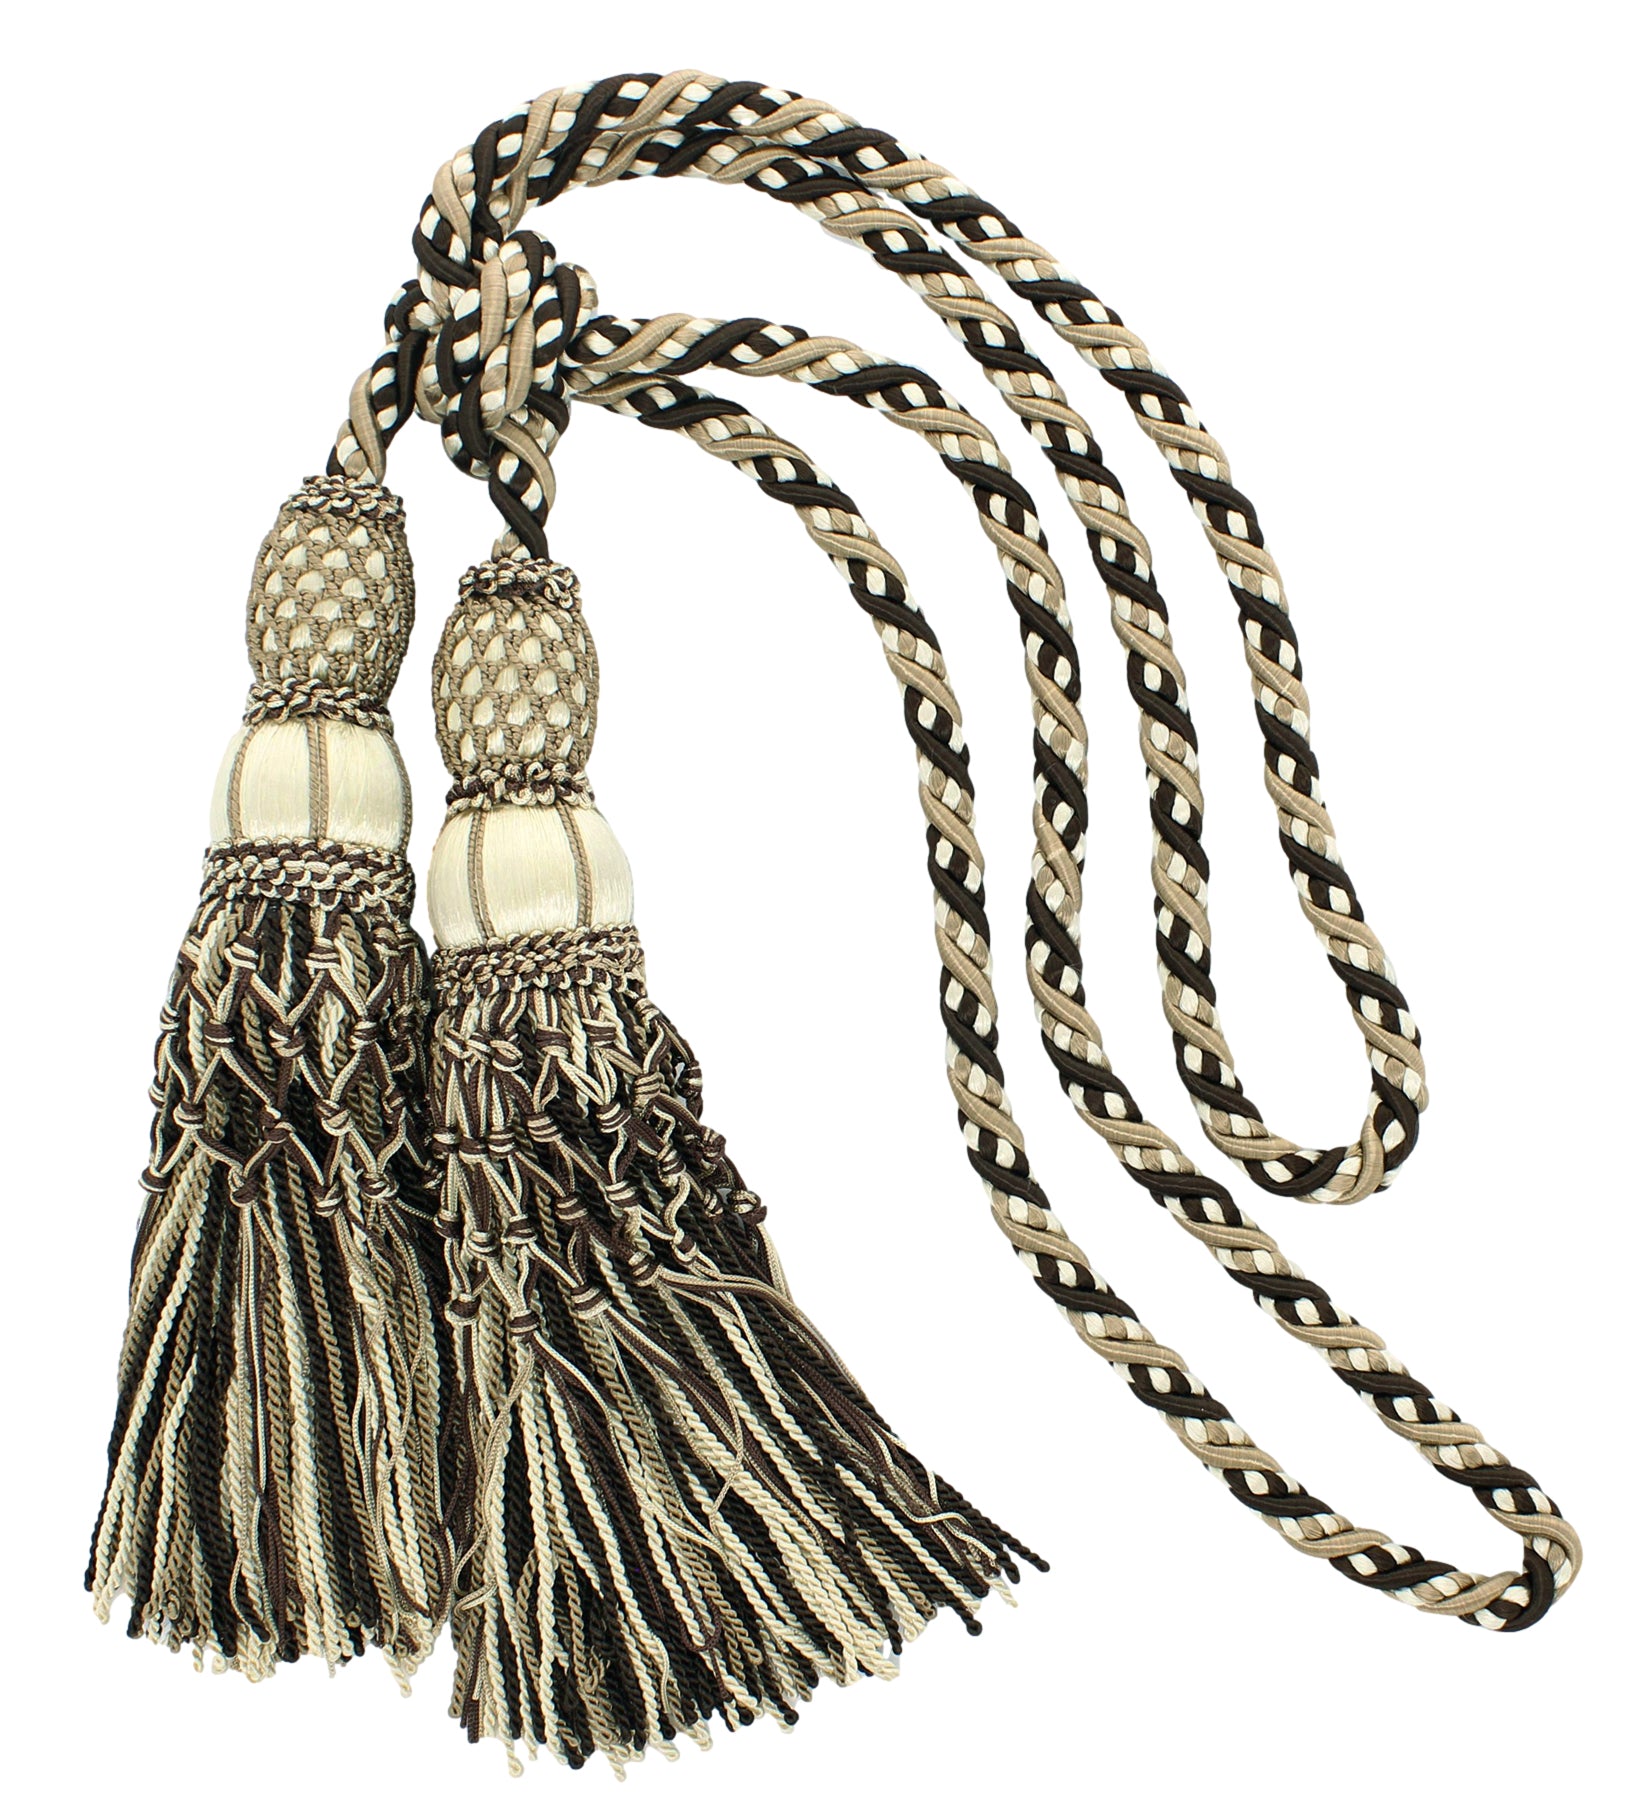 Tassel Tiebacks with Mini Tassels and Details Brown/Gold Tassel Tieback  with Mini Tassels and Details [TR7954] - $8.95 : Buy Cheap & Discount  Fashion Fabric Online